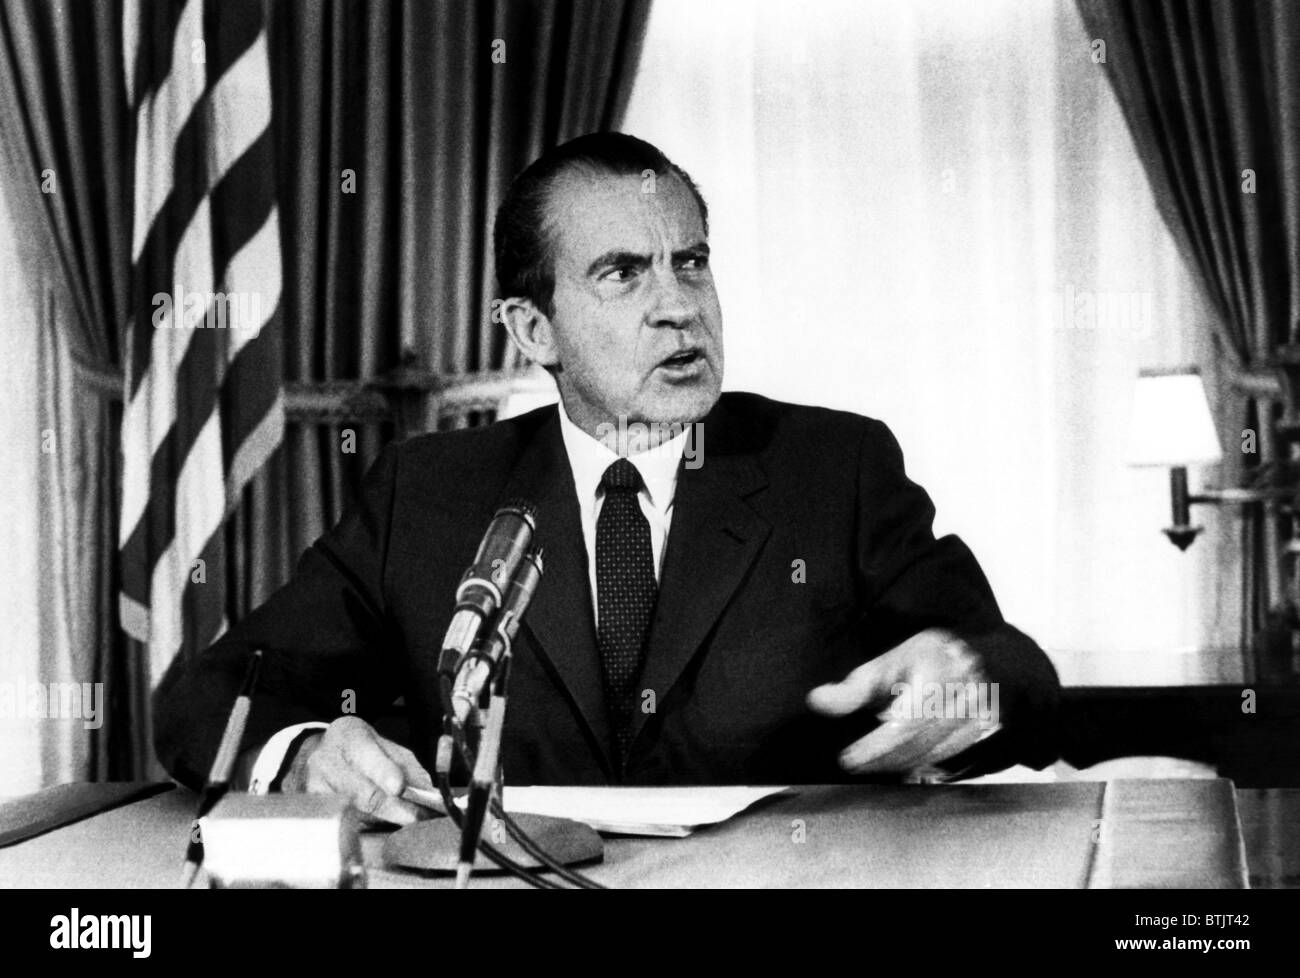 President Richard Nixon in the White House after giving a nationally broadcast speech, Washington D.C., October 17, 1969. Stock Photo